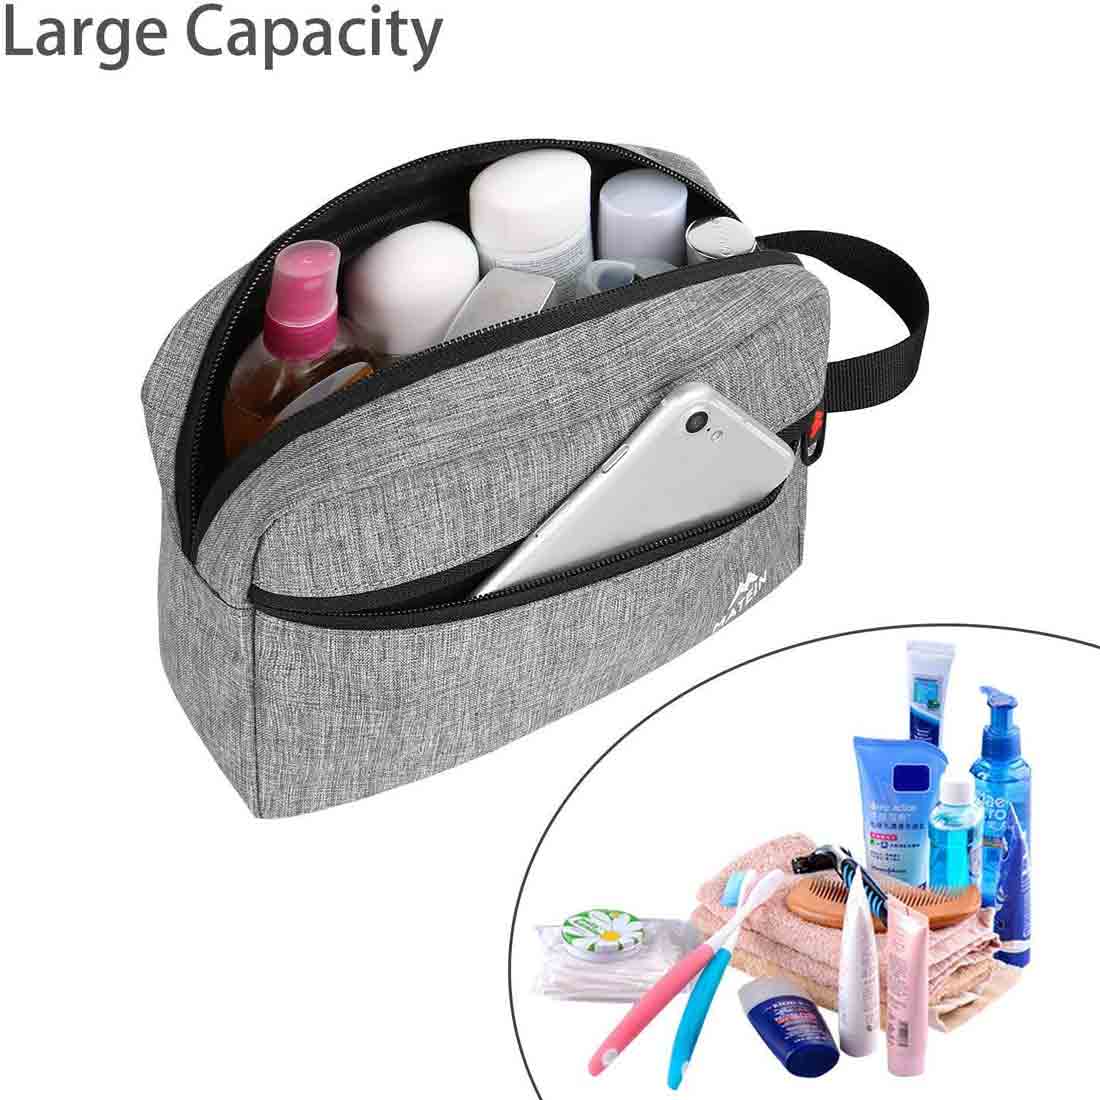 Travel backpack with wash bag